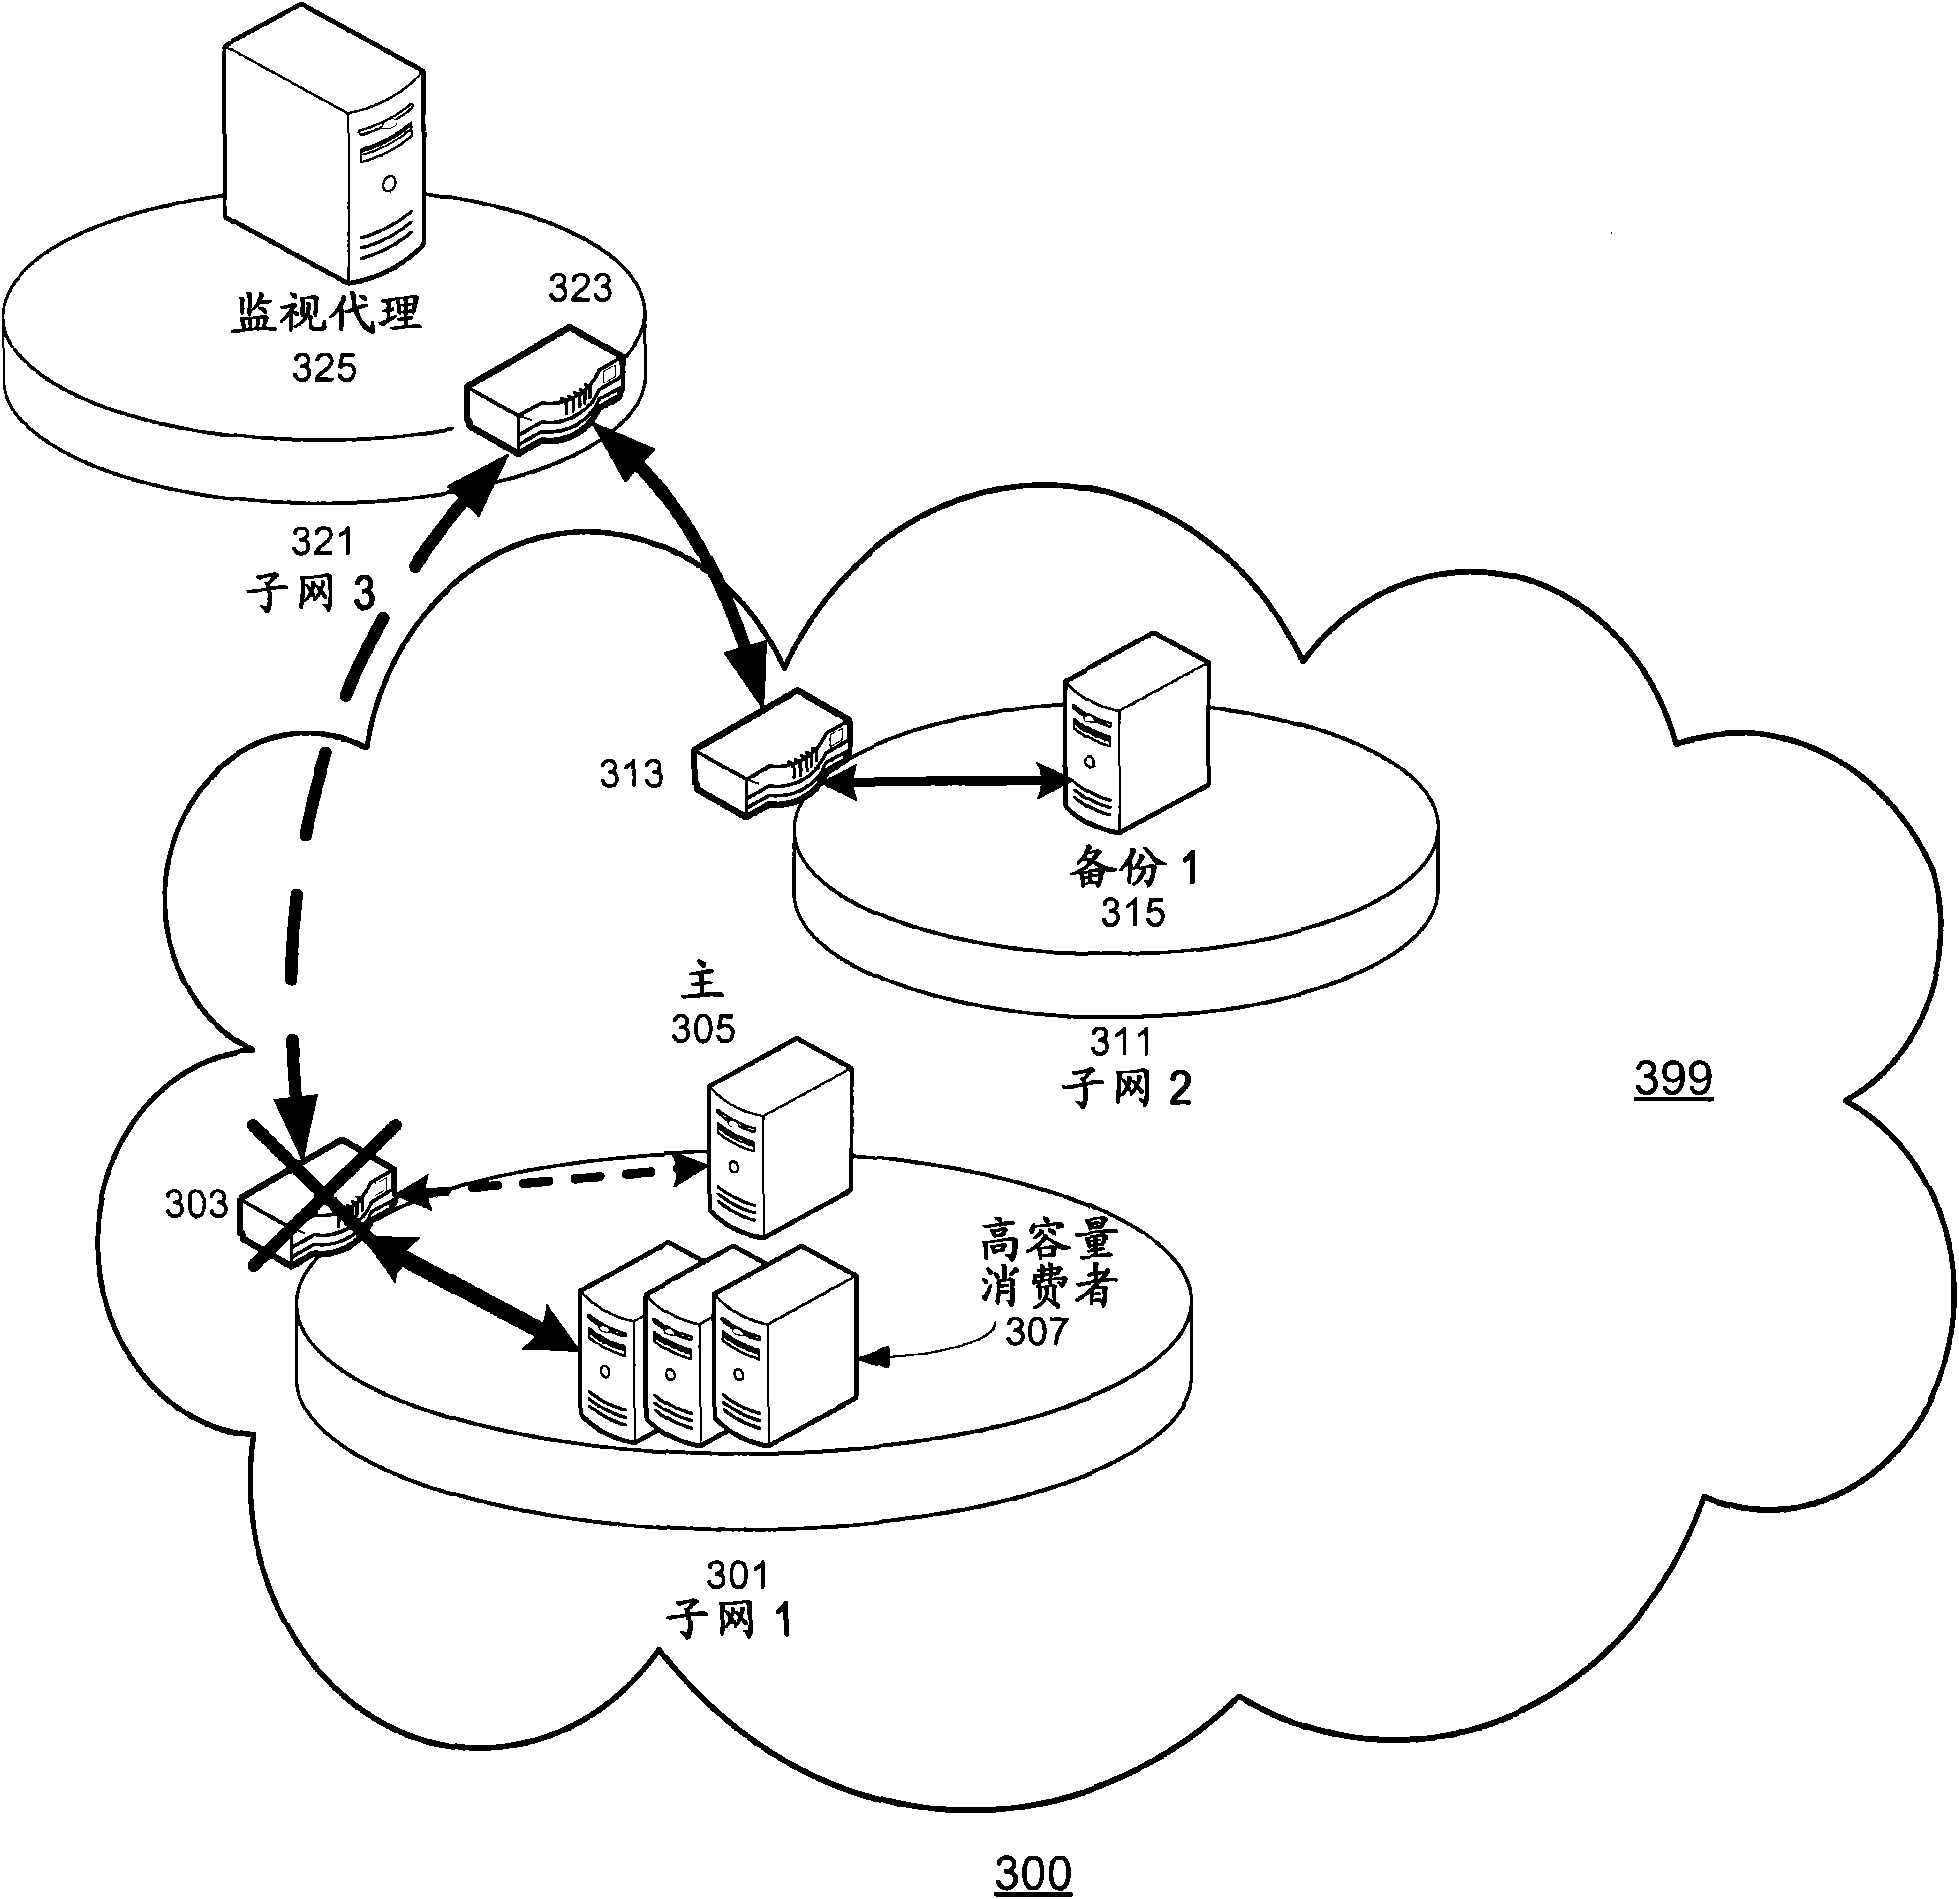 Method and system for application migration in a cloud